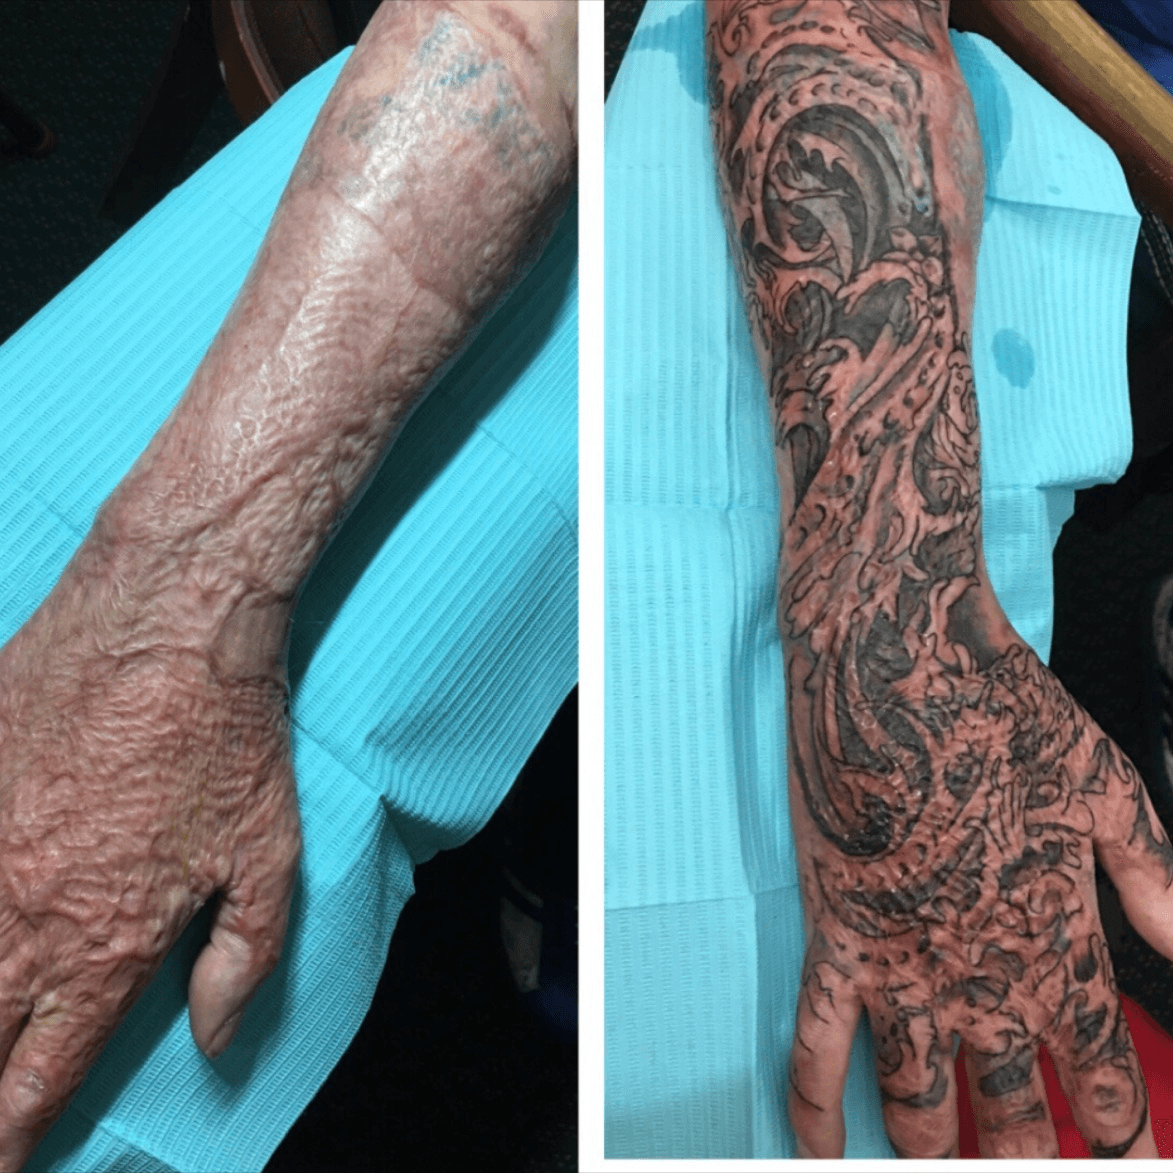 Reddit Users Are at Each Others Throats Over This Burnt Tattoo Photo   ScienceAlert